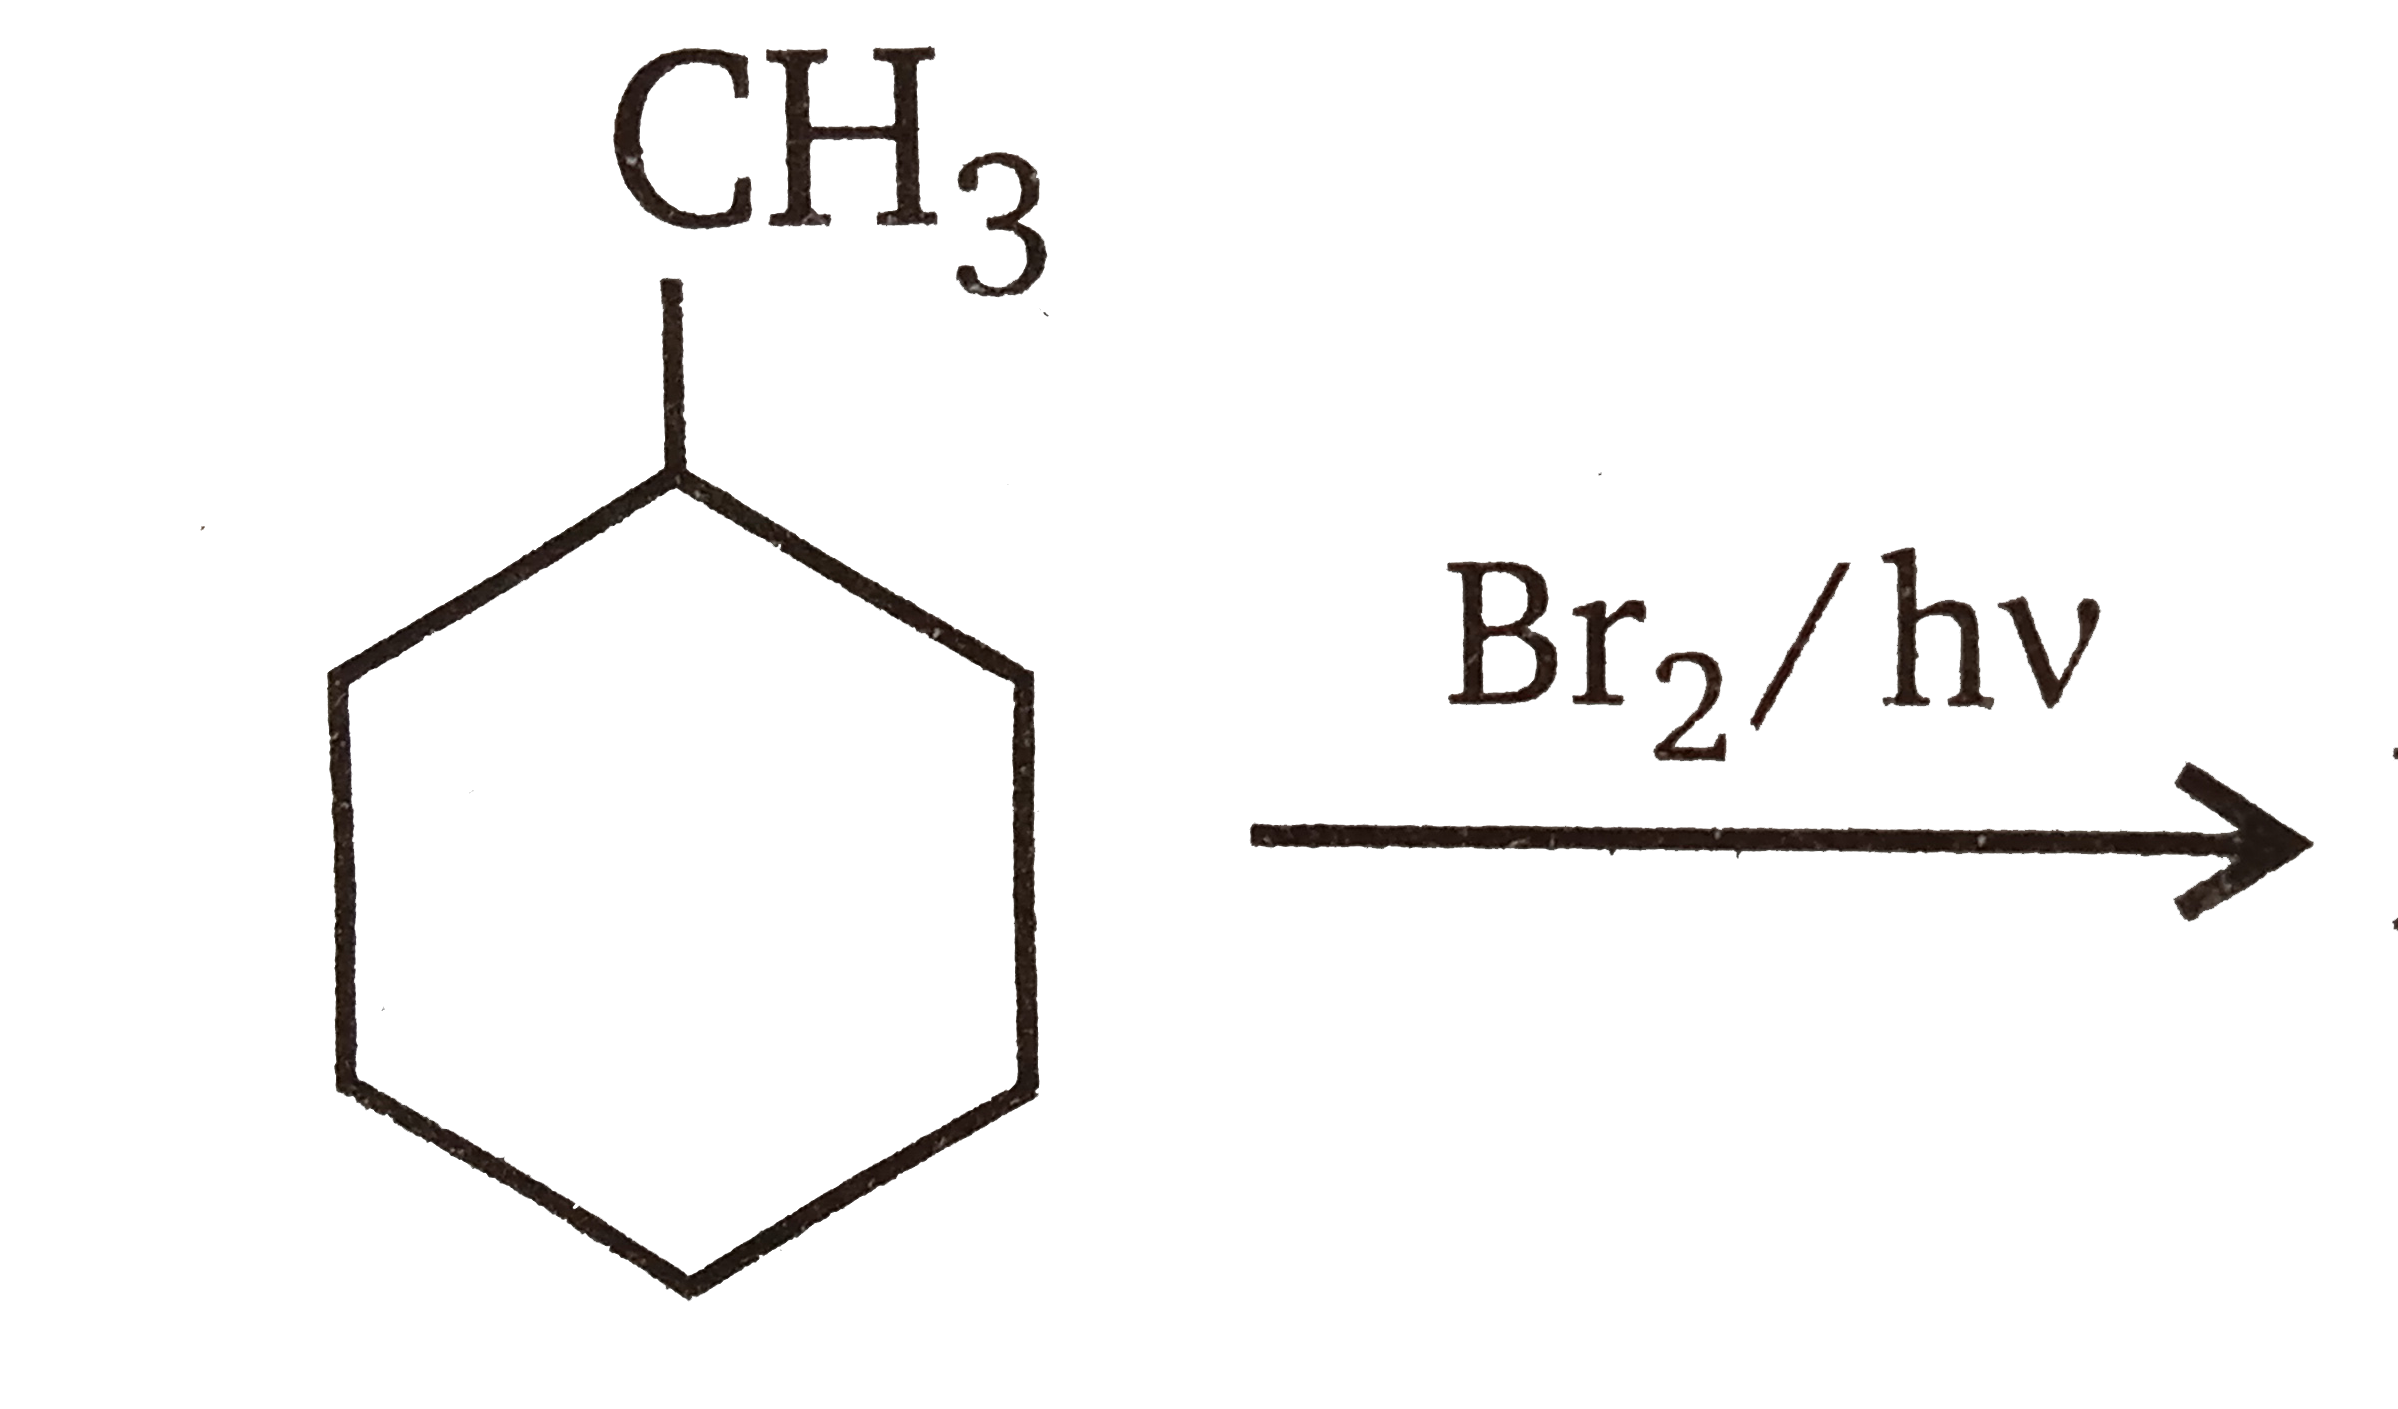 Monobromo derivatives   The number of possible monobromo products is (excluding stereoisomers):